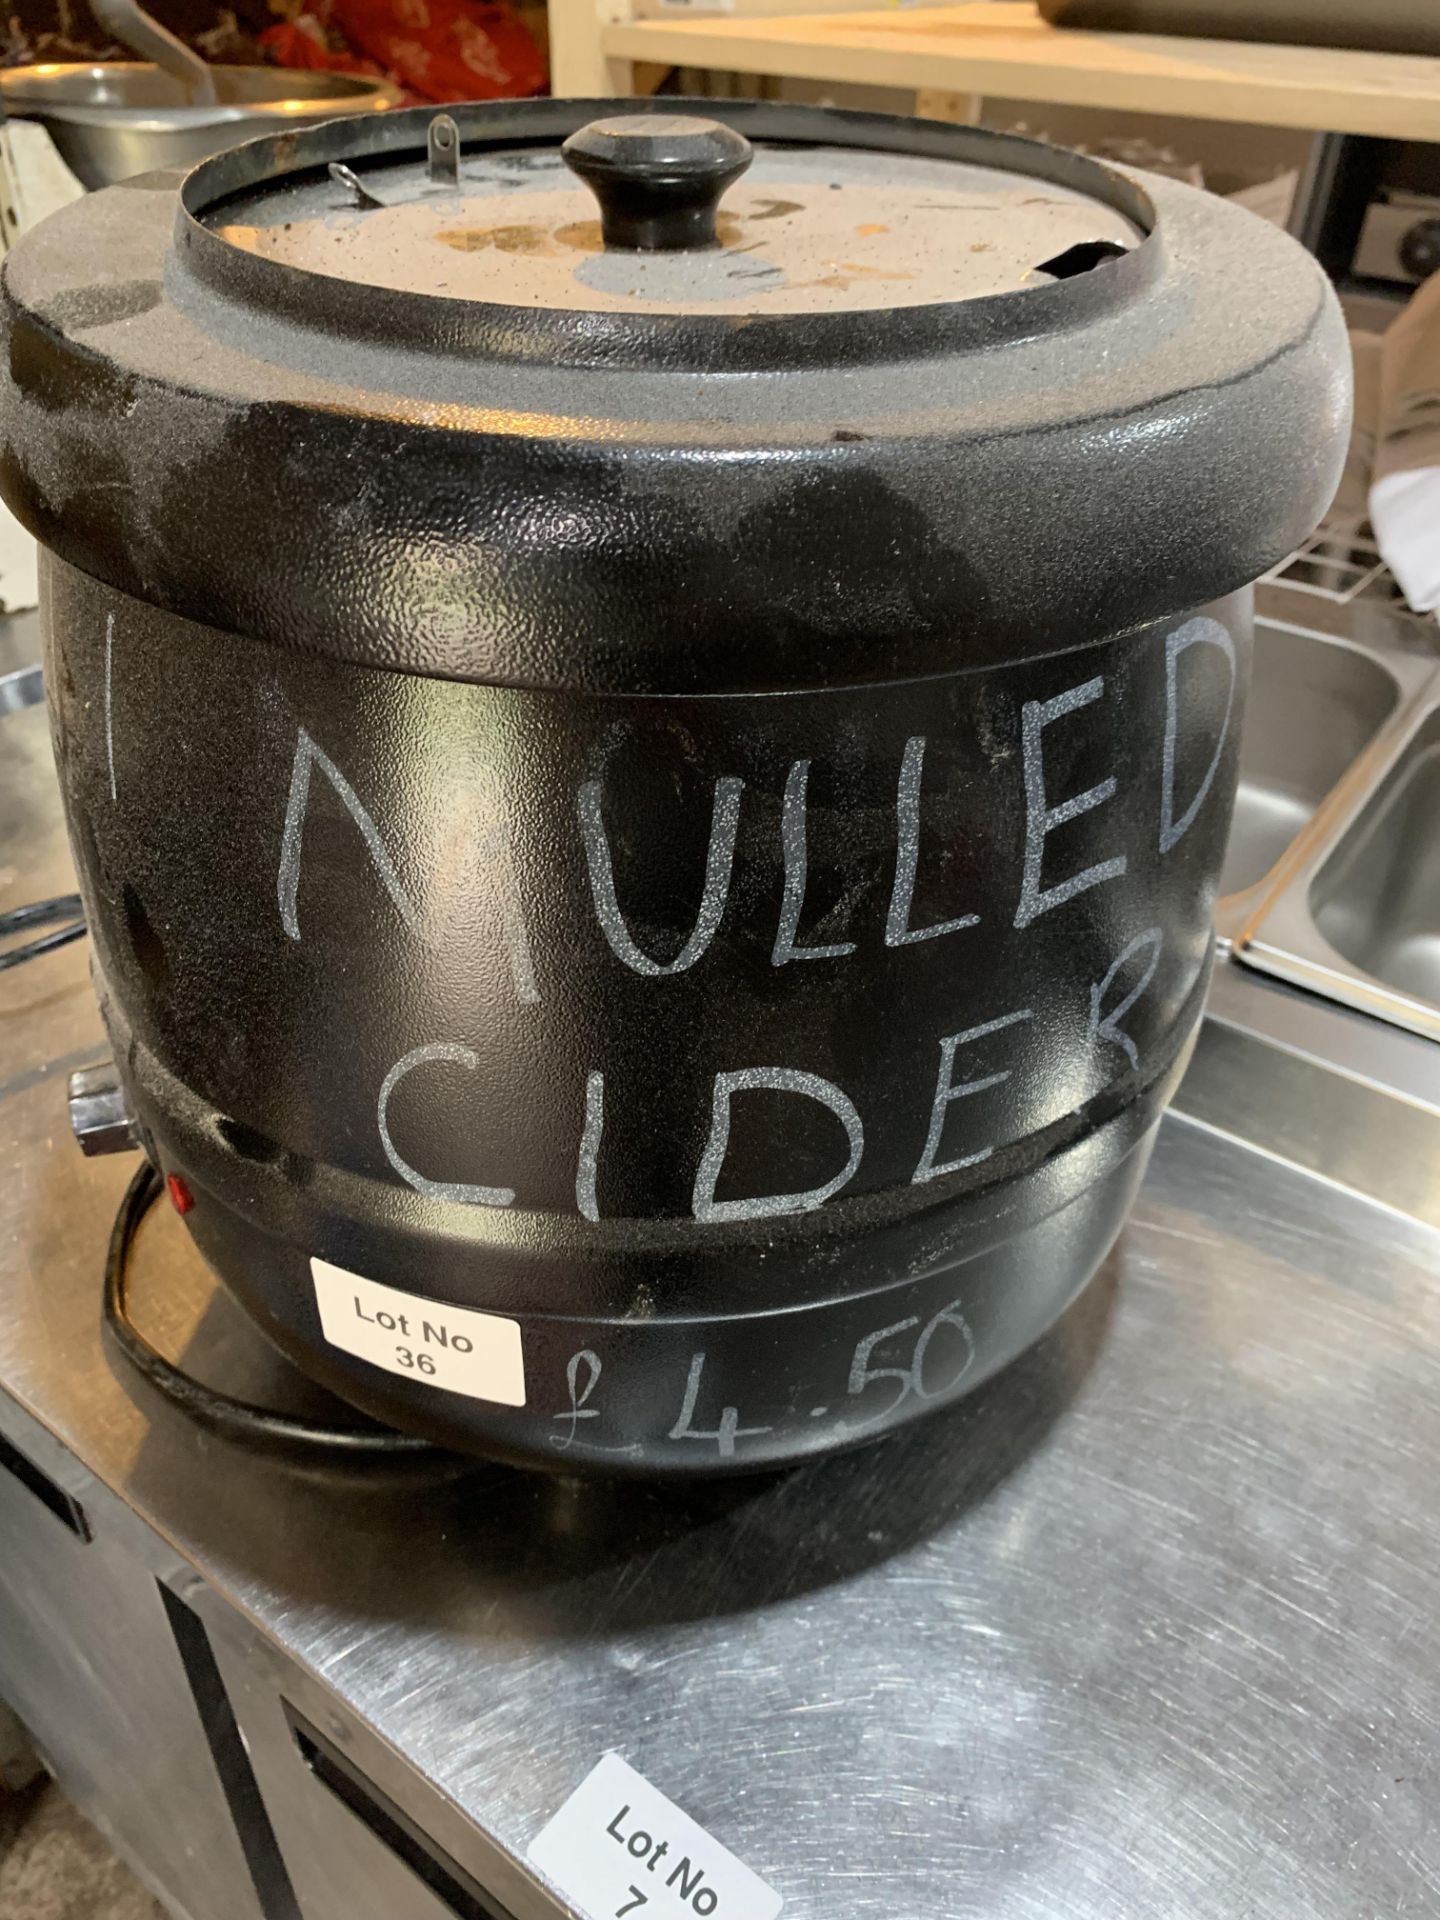 Heated Soup Pot used used for Mulled Cider